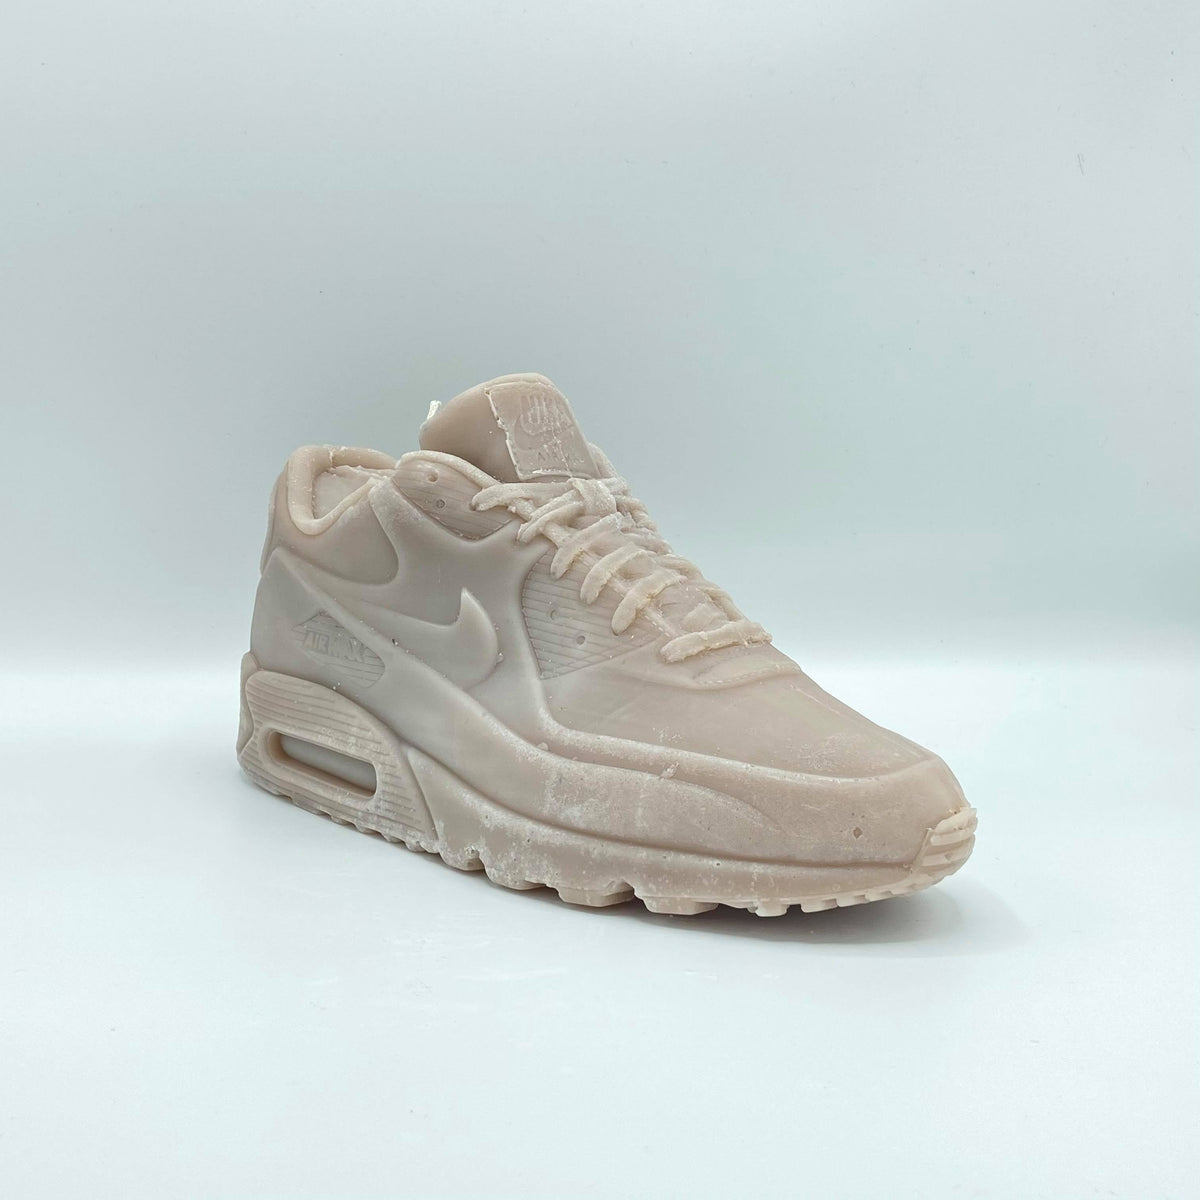 Candle model Air max 90